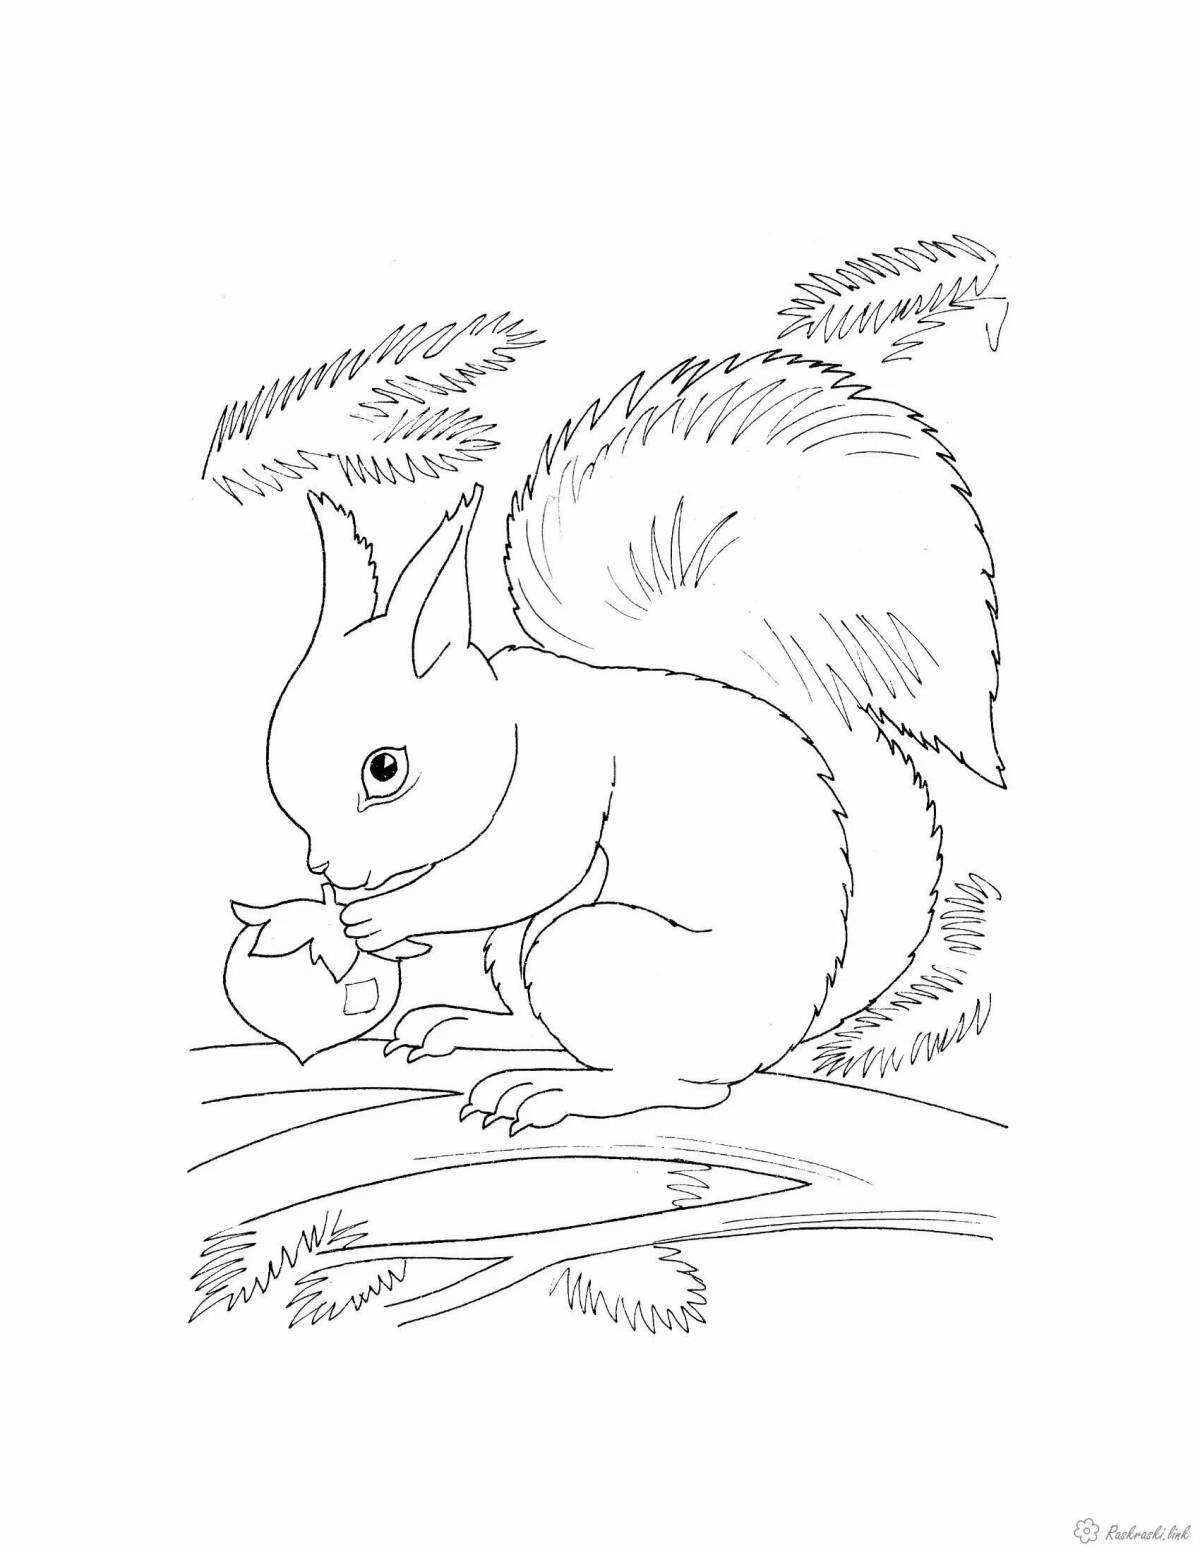 Fun squirrel coloring book for kids 6-7 years old